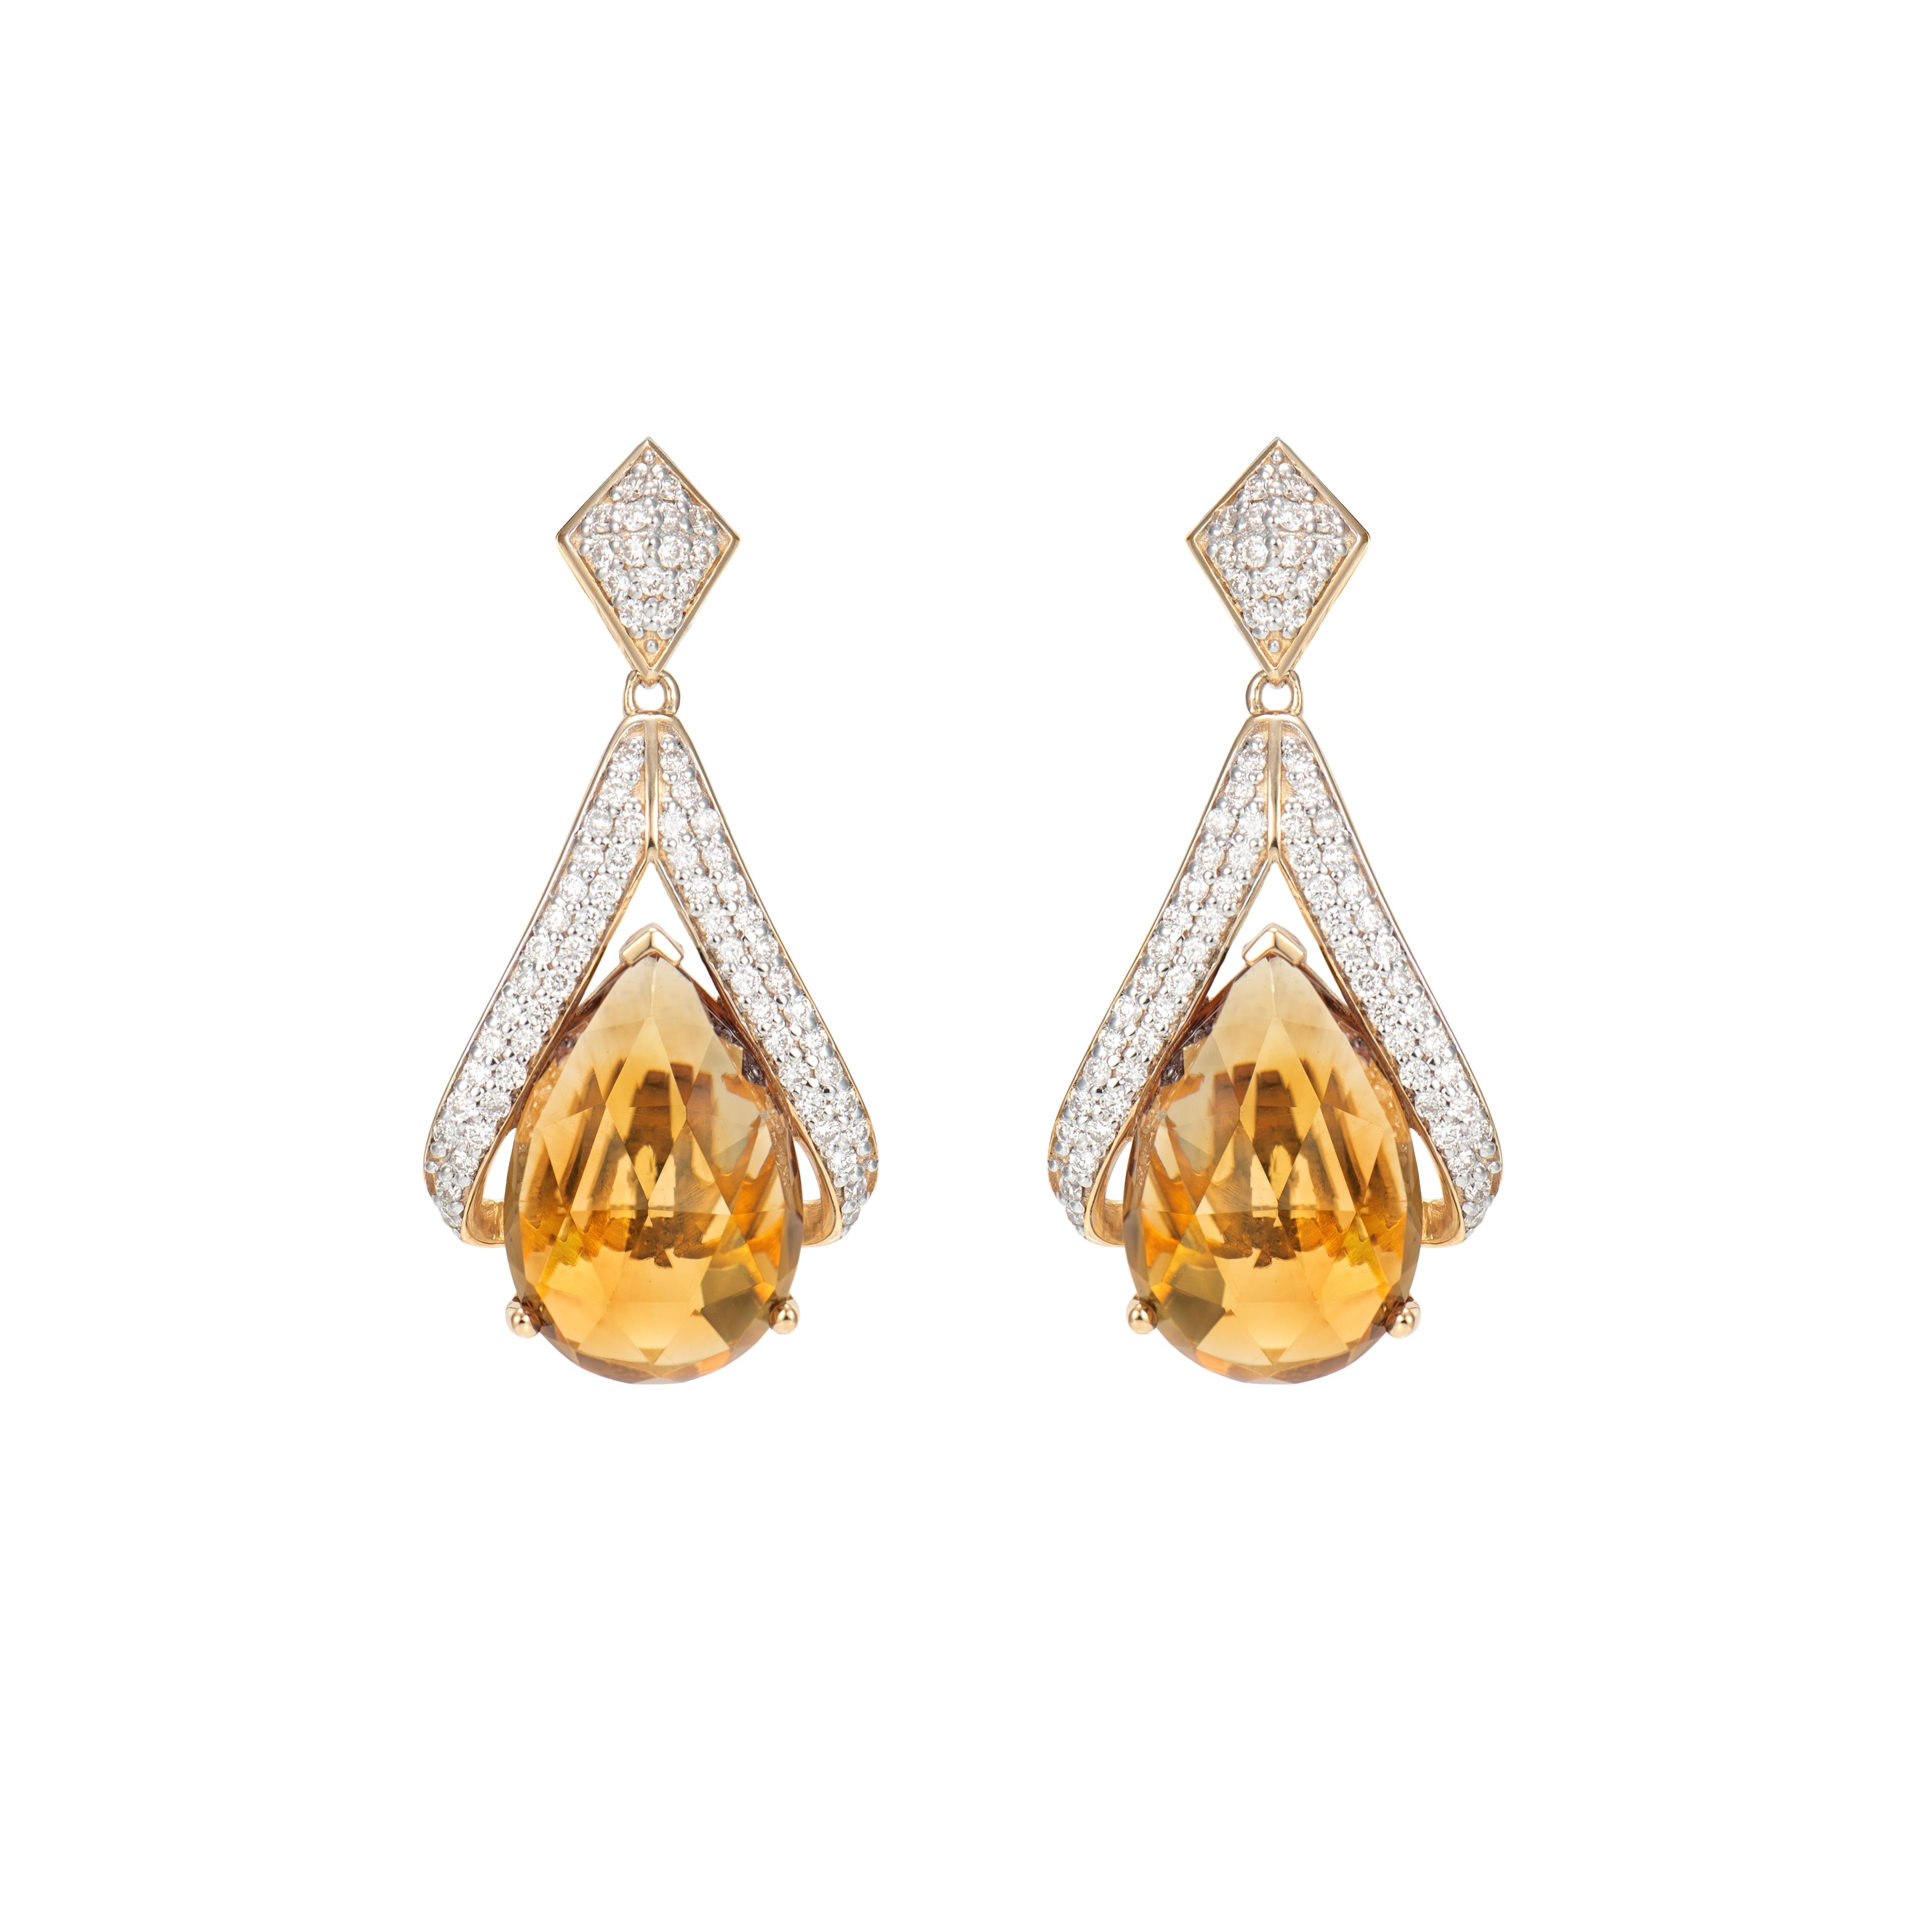 Pear Cut Citrine Drop Earring in 18 Karat Yellow Gold with White Diamond.